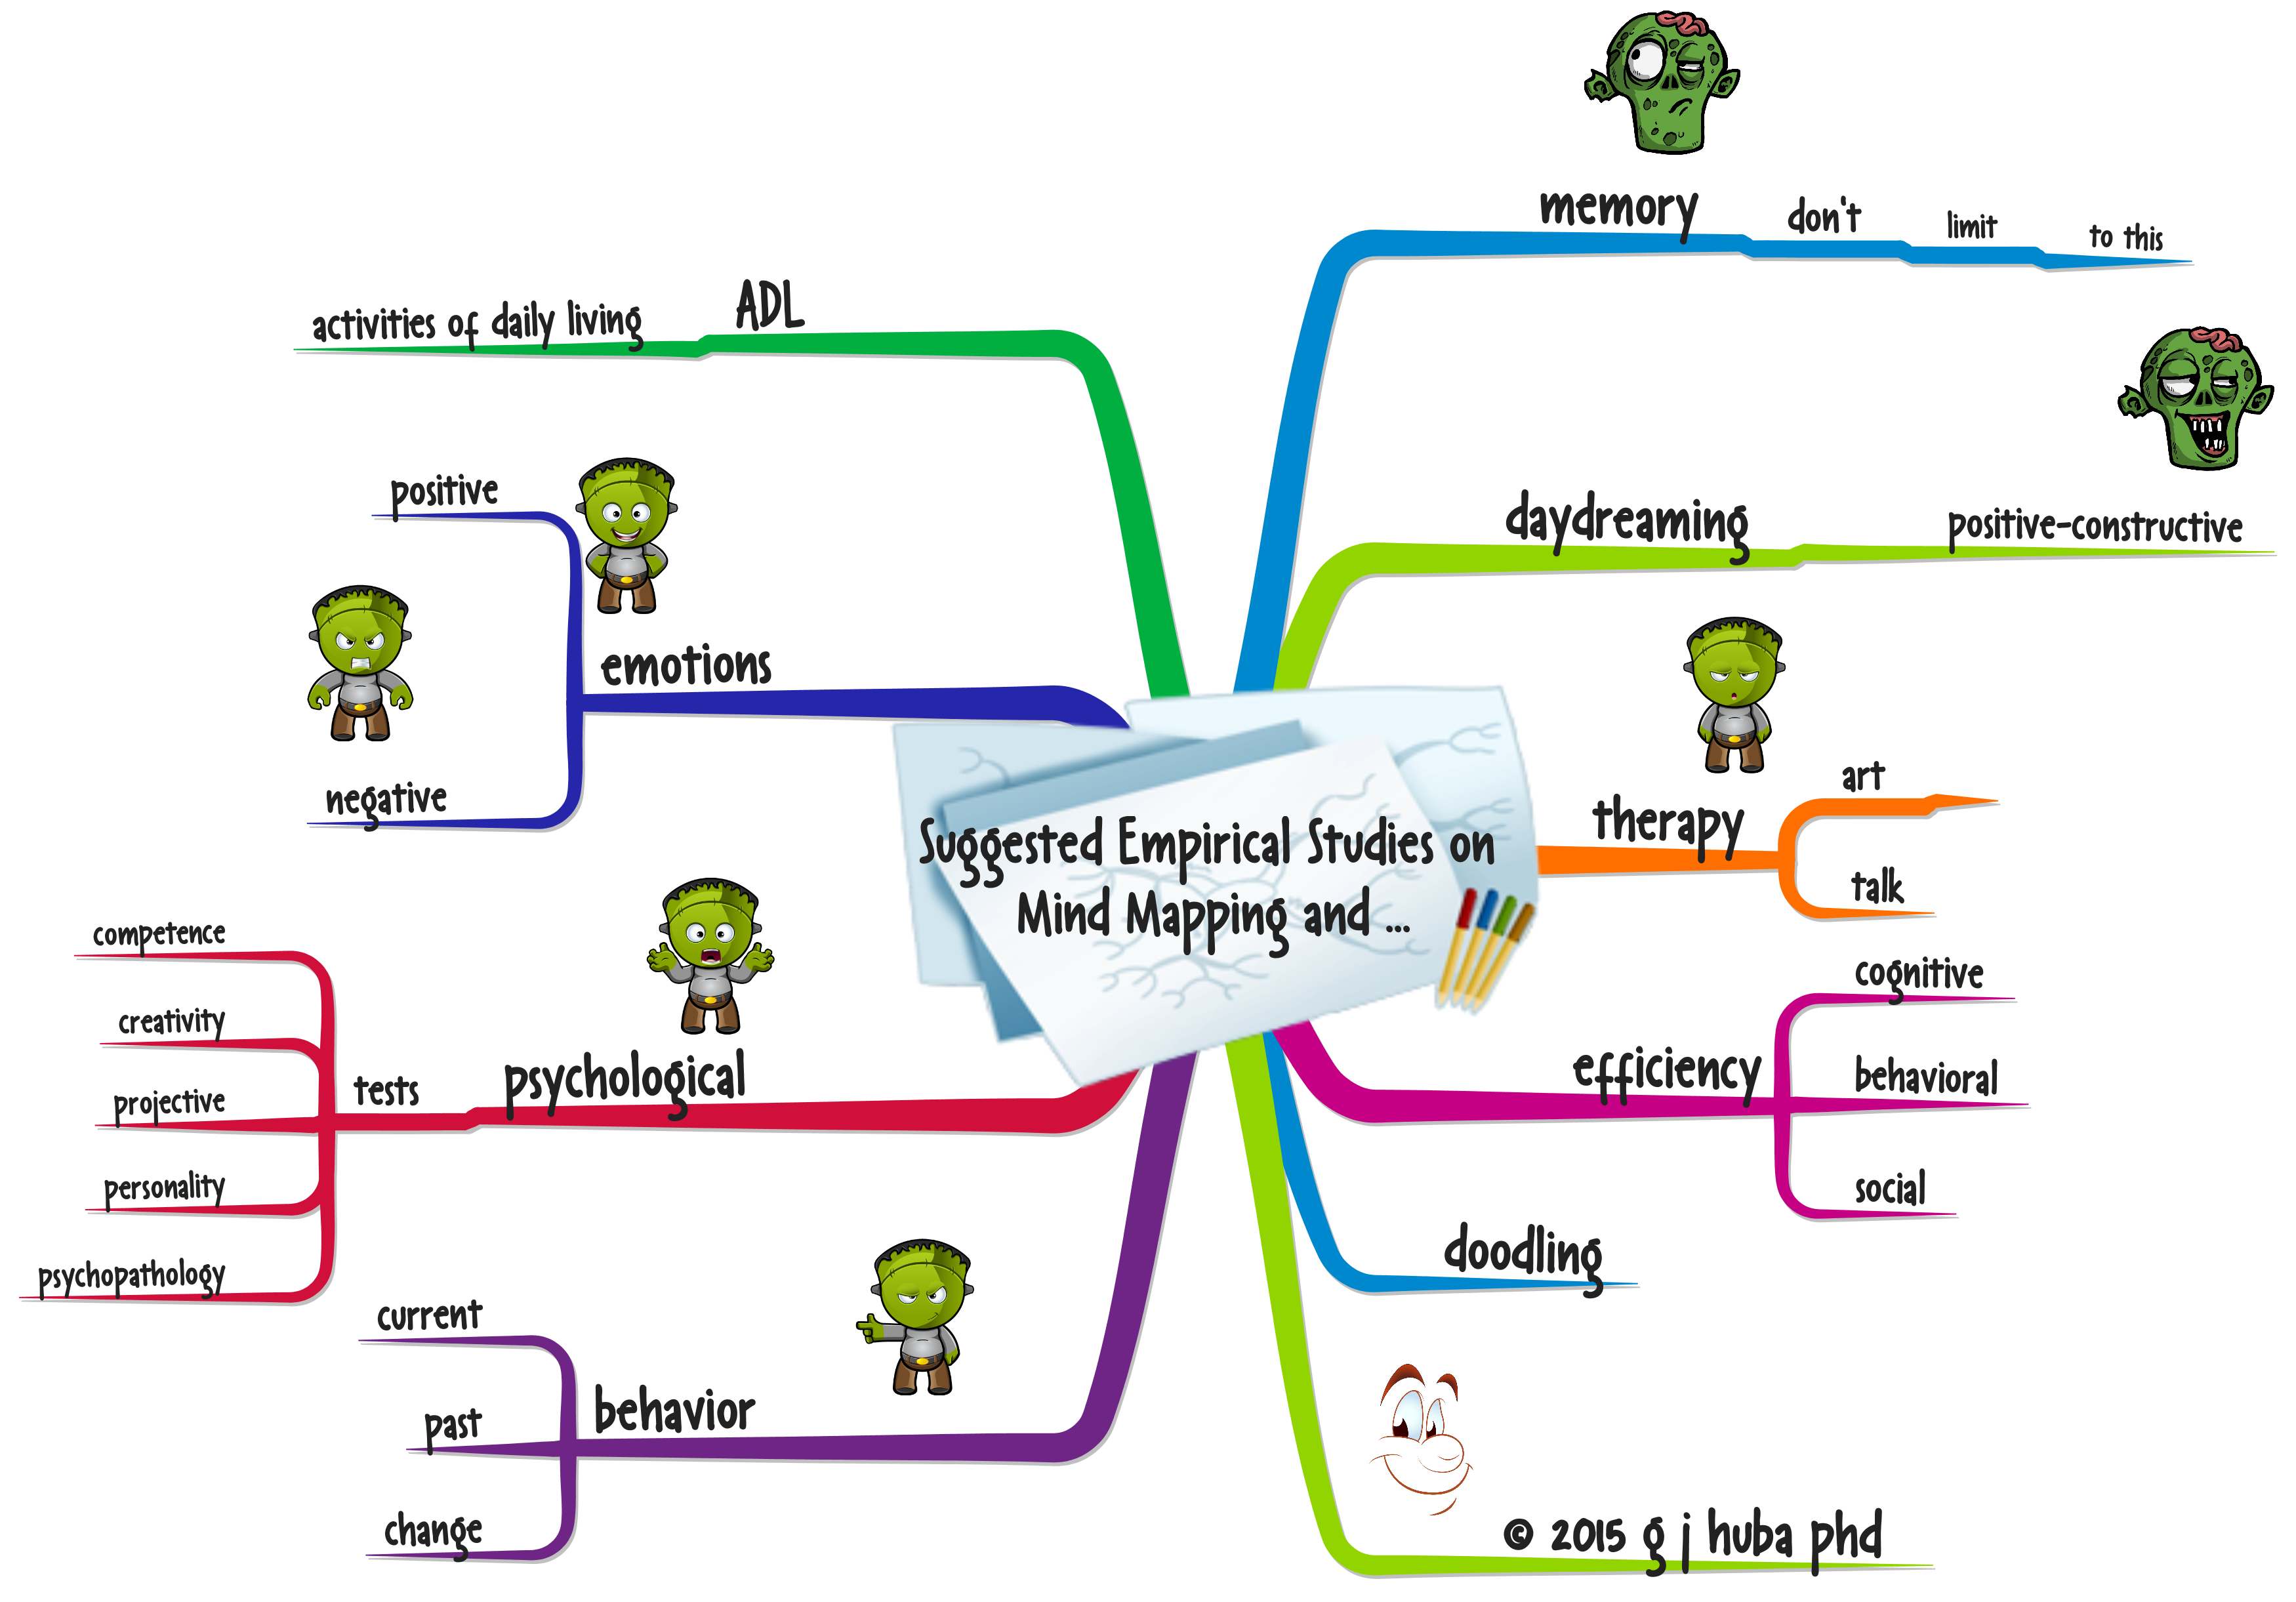 Suggested Empirical Studies on  Mind Mapping and ...